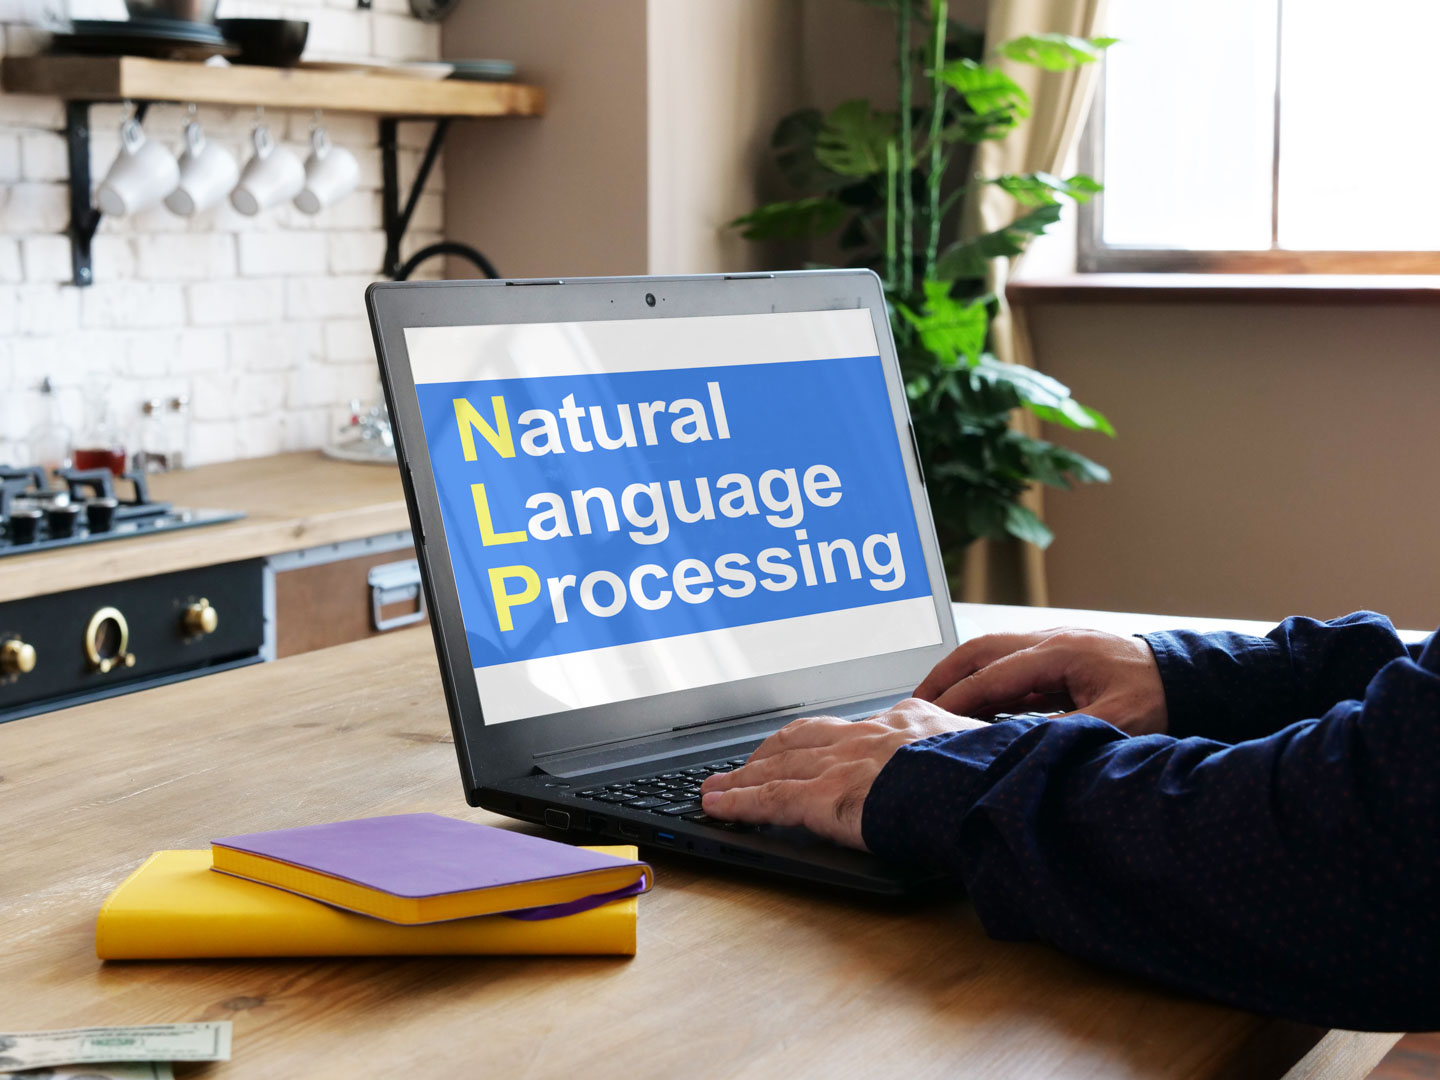 Natural-language processing NLP is shown on a photo using the text